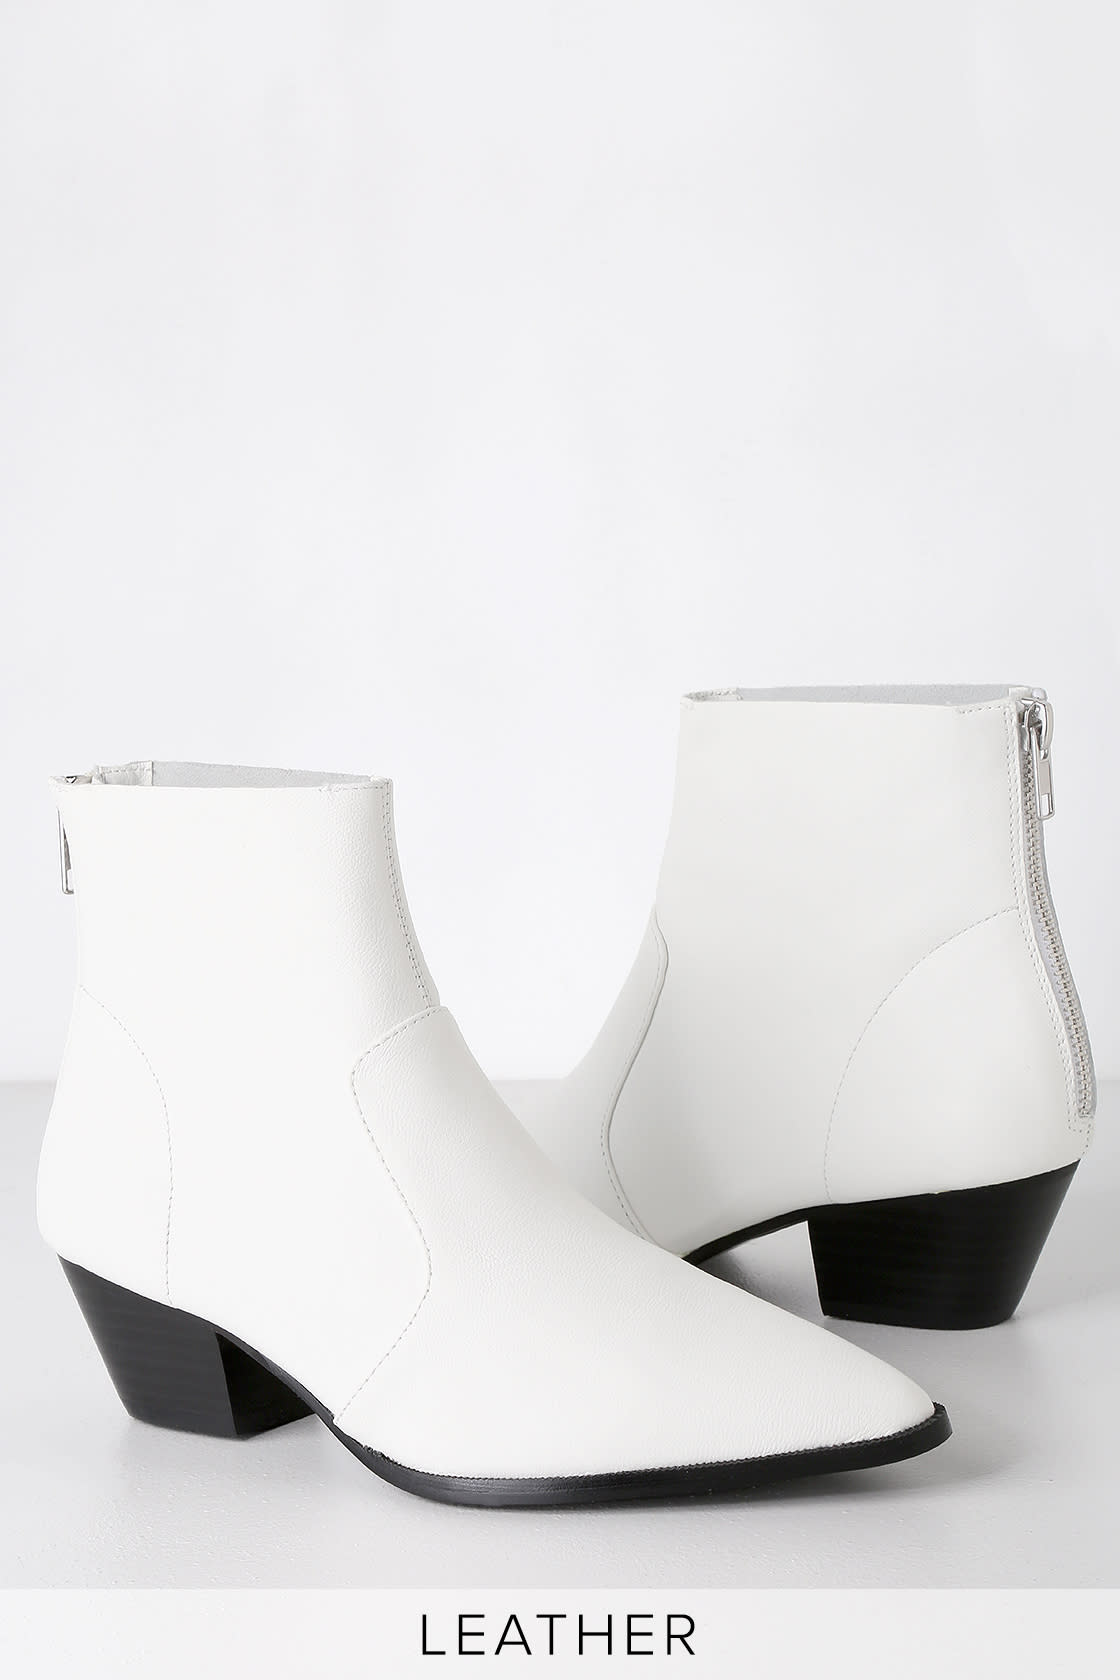 Steve Madden Cafe - White Booties - Leather Ankle Booties - Lulus